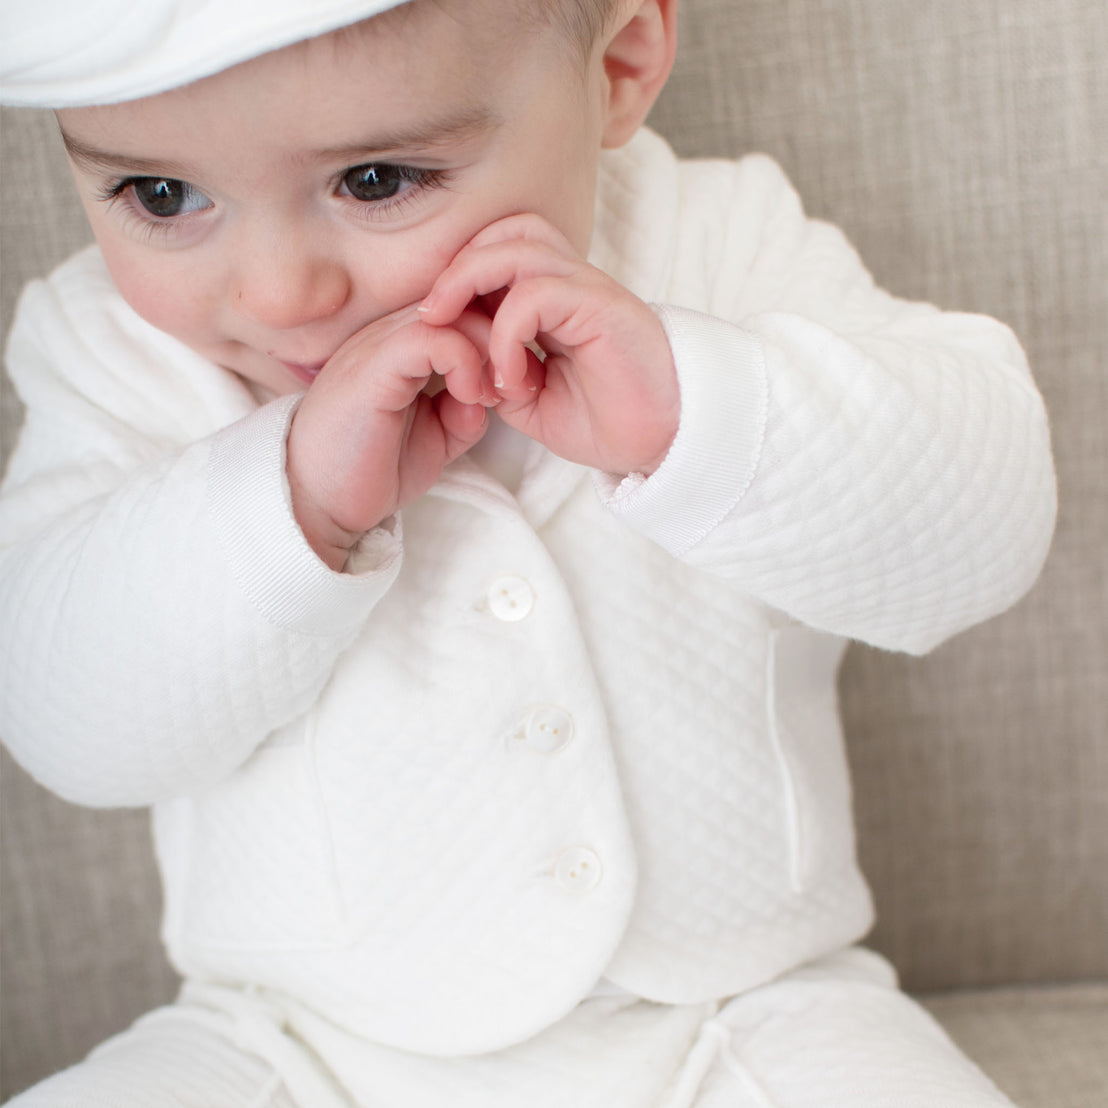 Close up detail of baby boy wearing the Elijah 3-Piece Suit. The photo shows the details of the white textured cotton